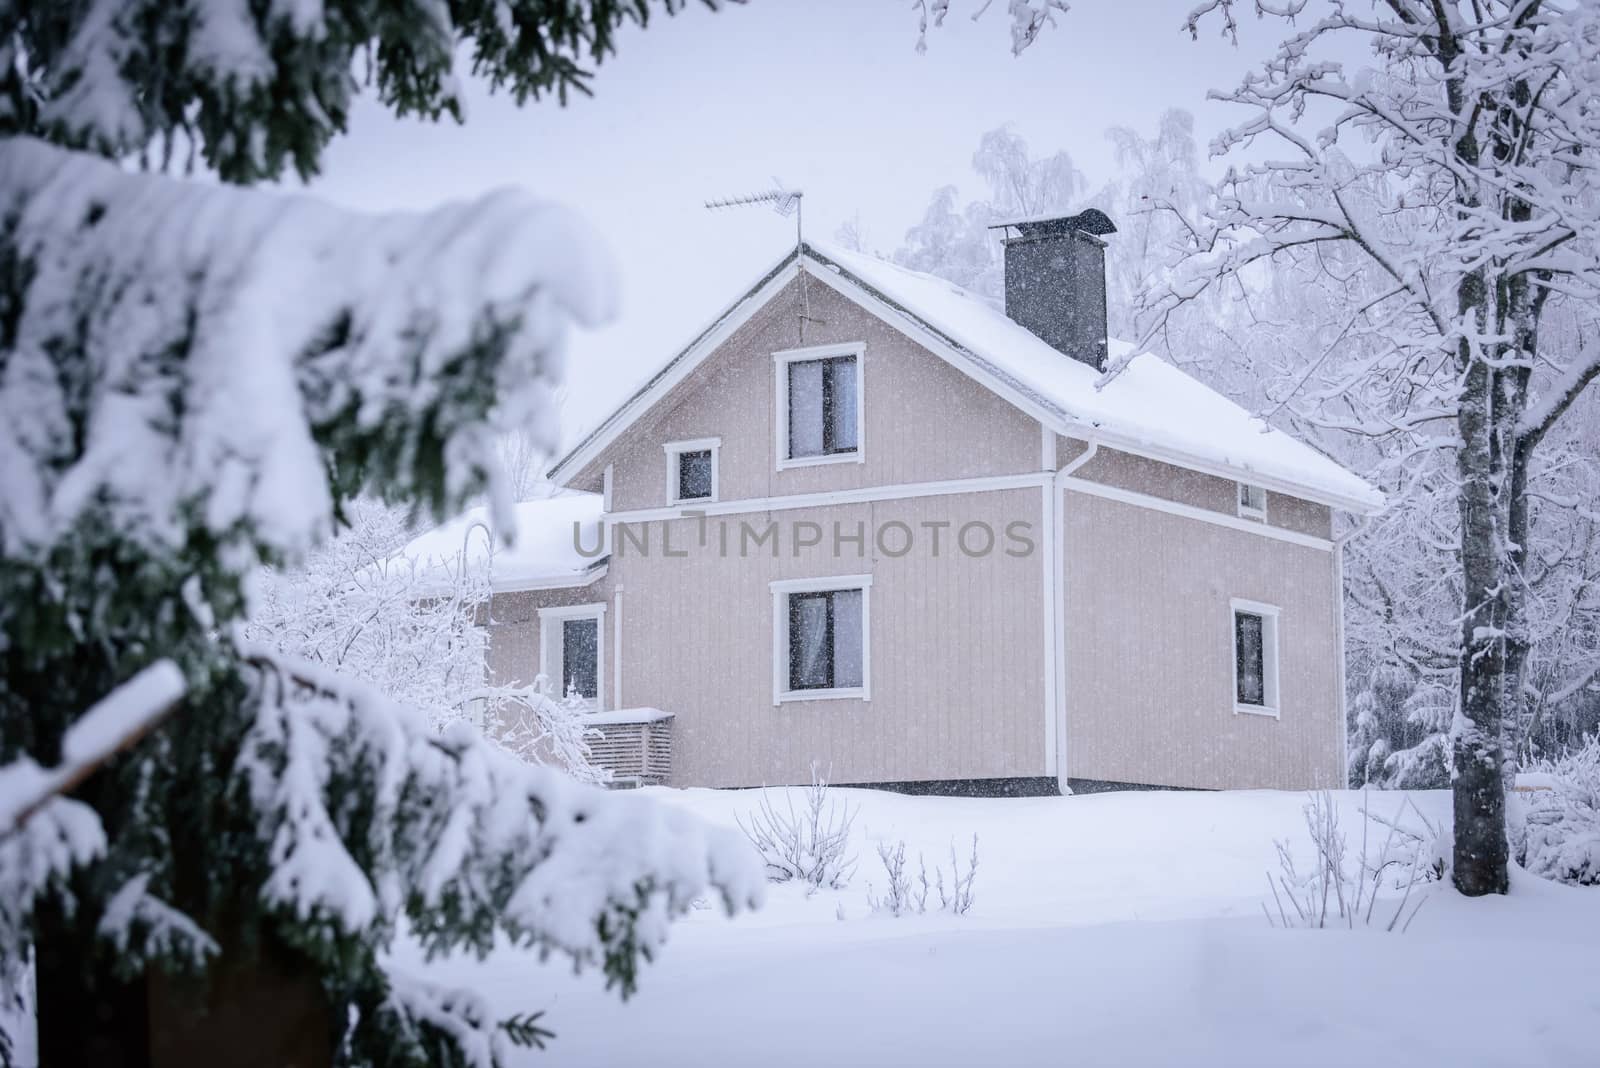 The house in the forest has covered with heavy snow and bad sky in winter season at Tuupovaara, Finland.